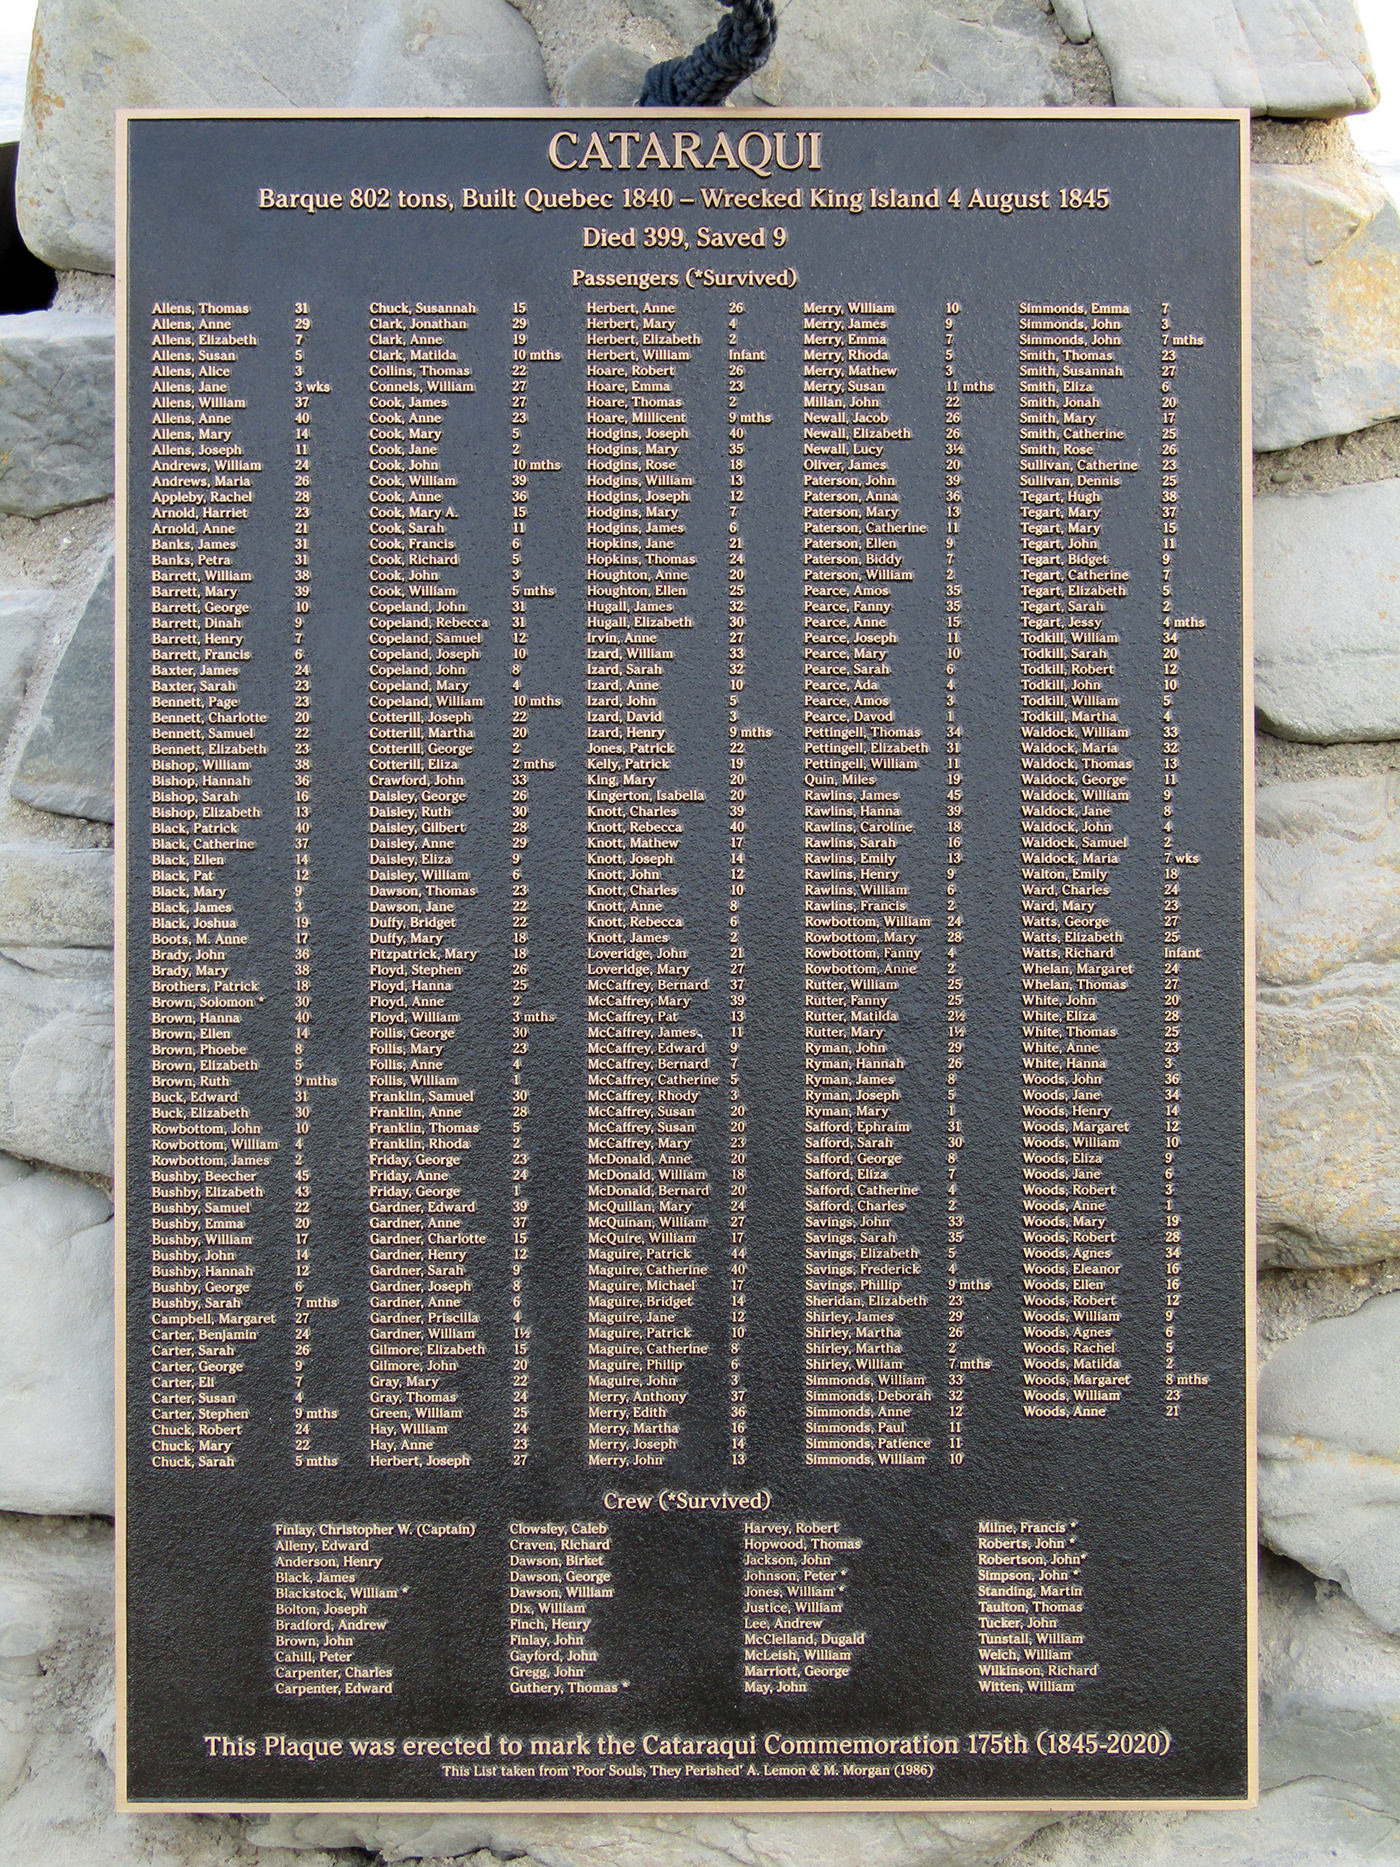 Close-up of the plaque with names of the survivors and dead and their ages at time of the wreck.